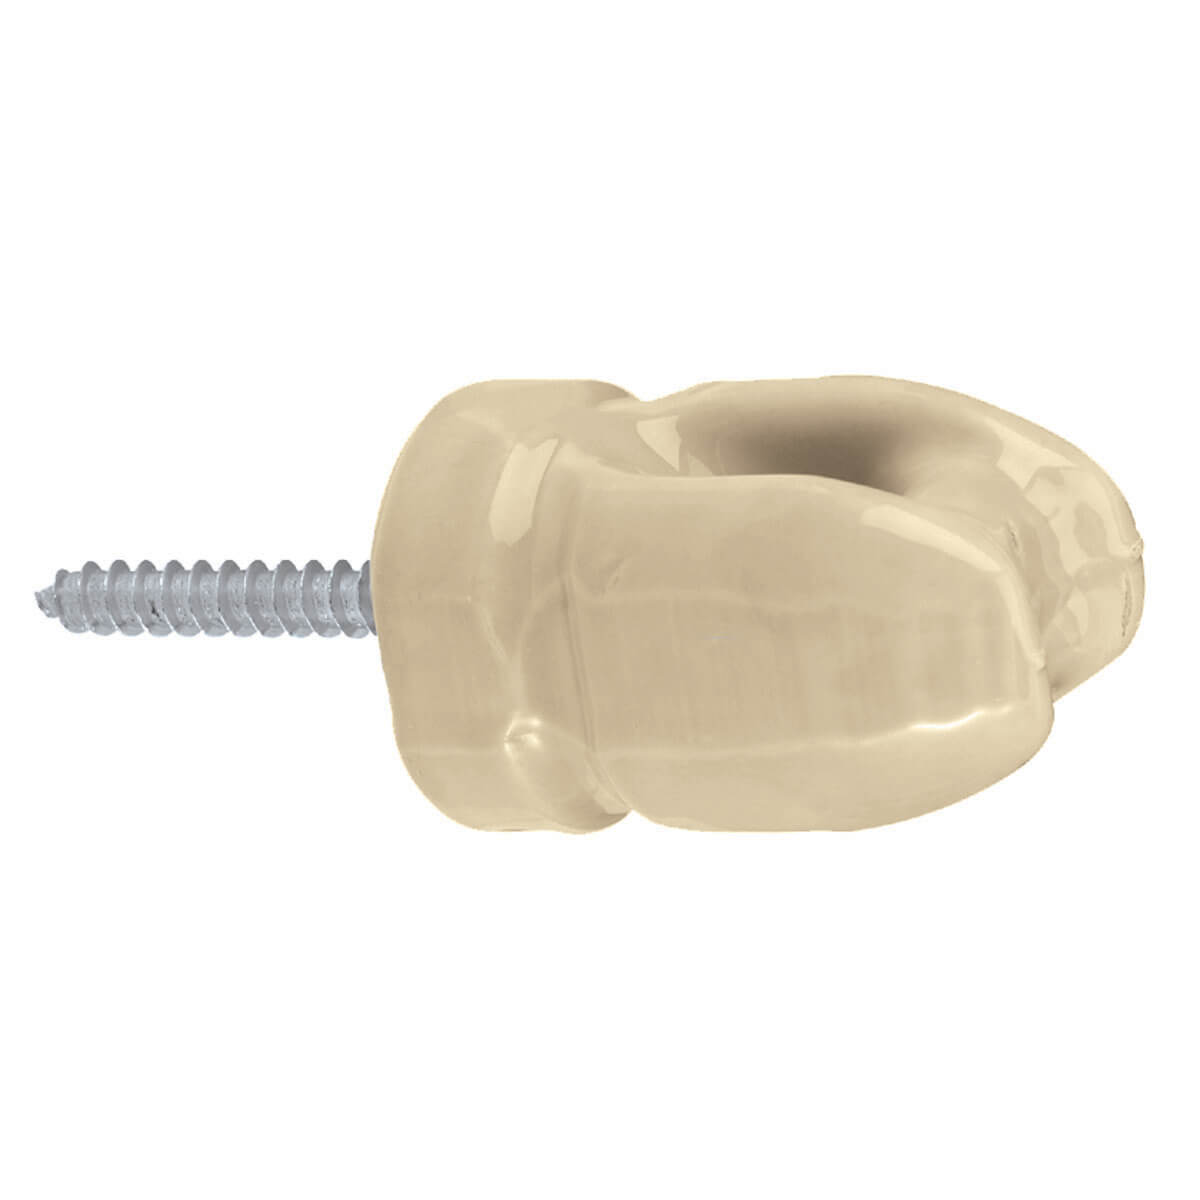 Light Duty Porcelain Insulator with Lage Screw